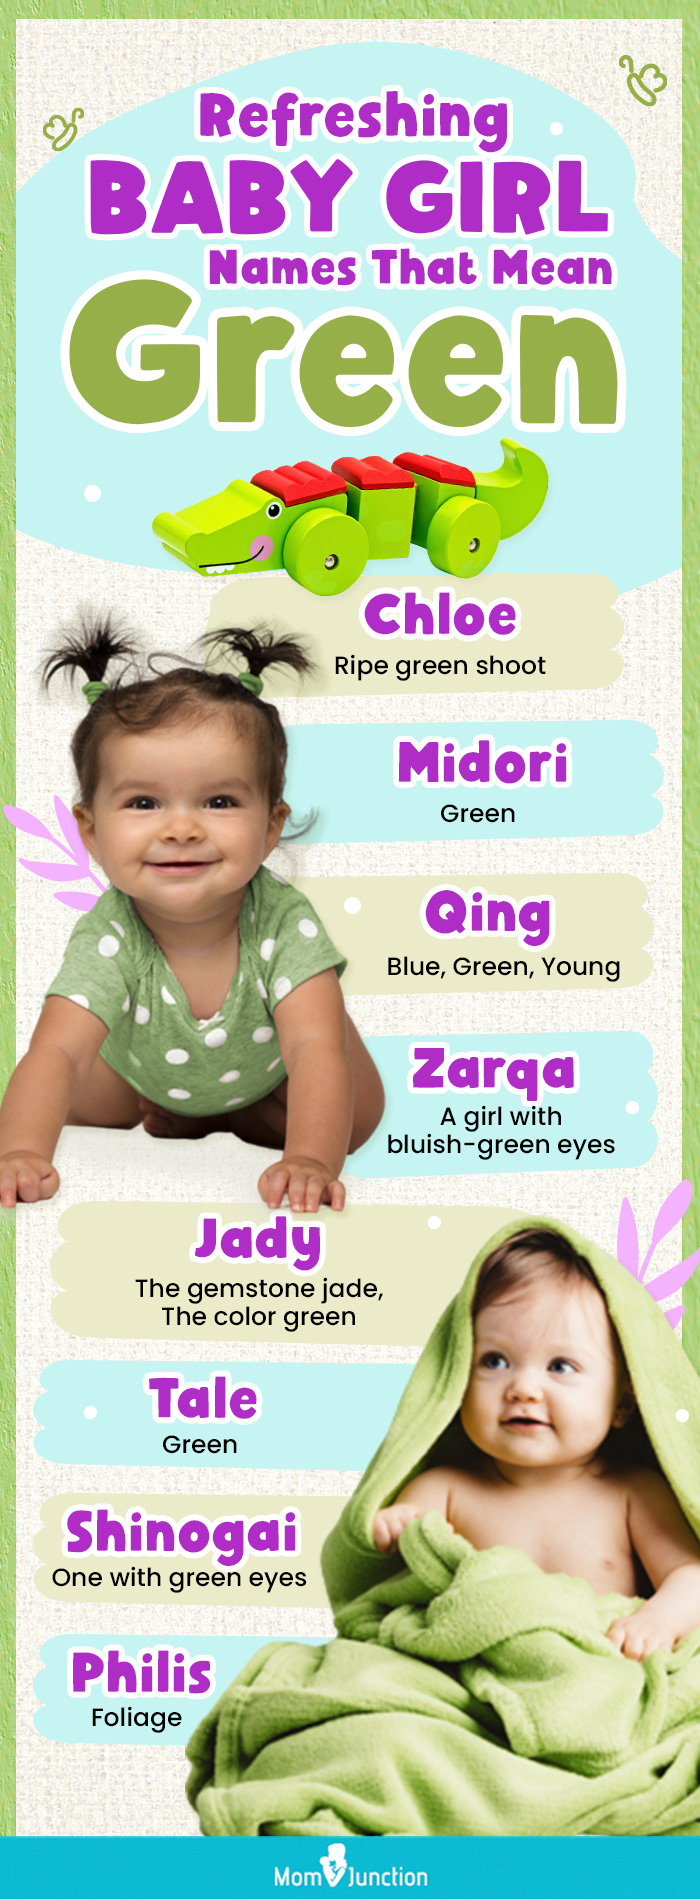 refreshing baby girl names that mean green (infographic)